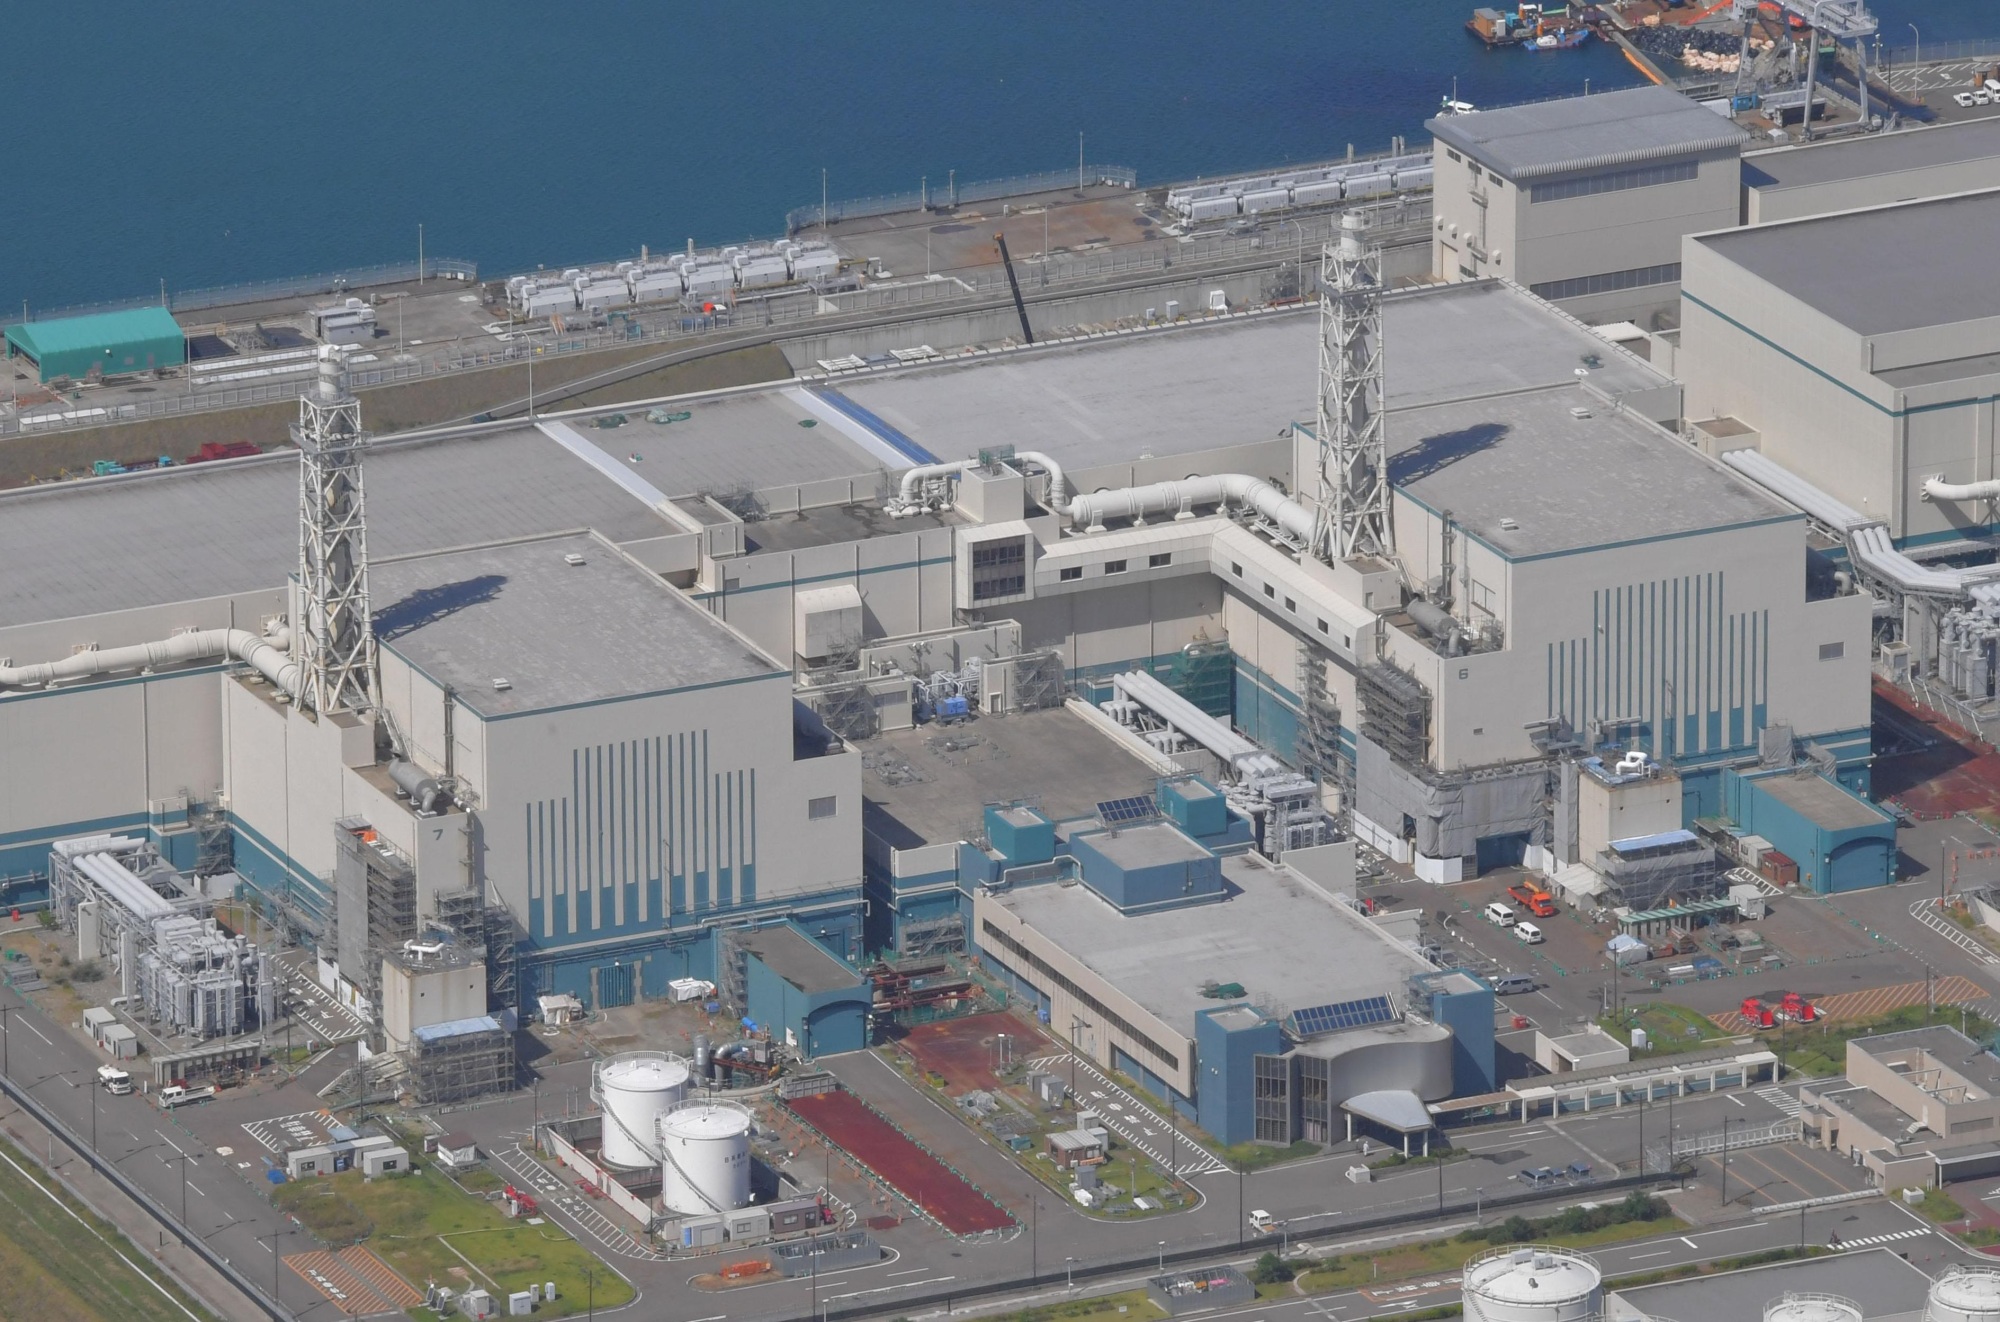 The Nuclear Regulation Authority gave its approval Wednesday to restart the No. 6 and No. 7 reactors at the Kashiwazaki-Kariwa nuclear power plant in Niigata Prefecture, the first reactors operated by Tokyo Electric Power Company Holdings Inc. to formally clear the stricter safety standards. | KYODO